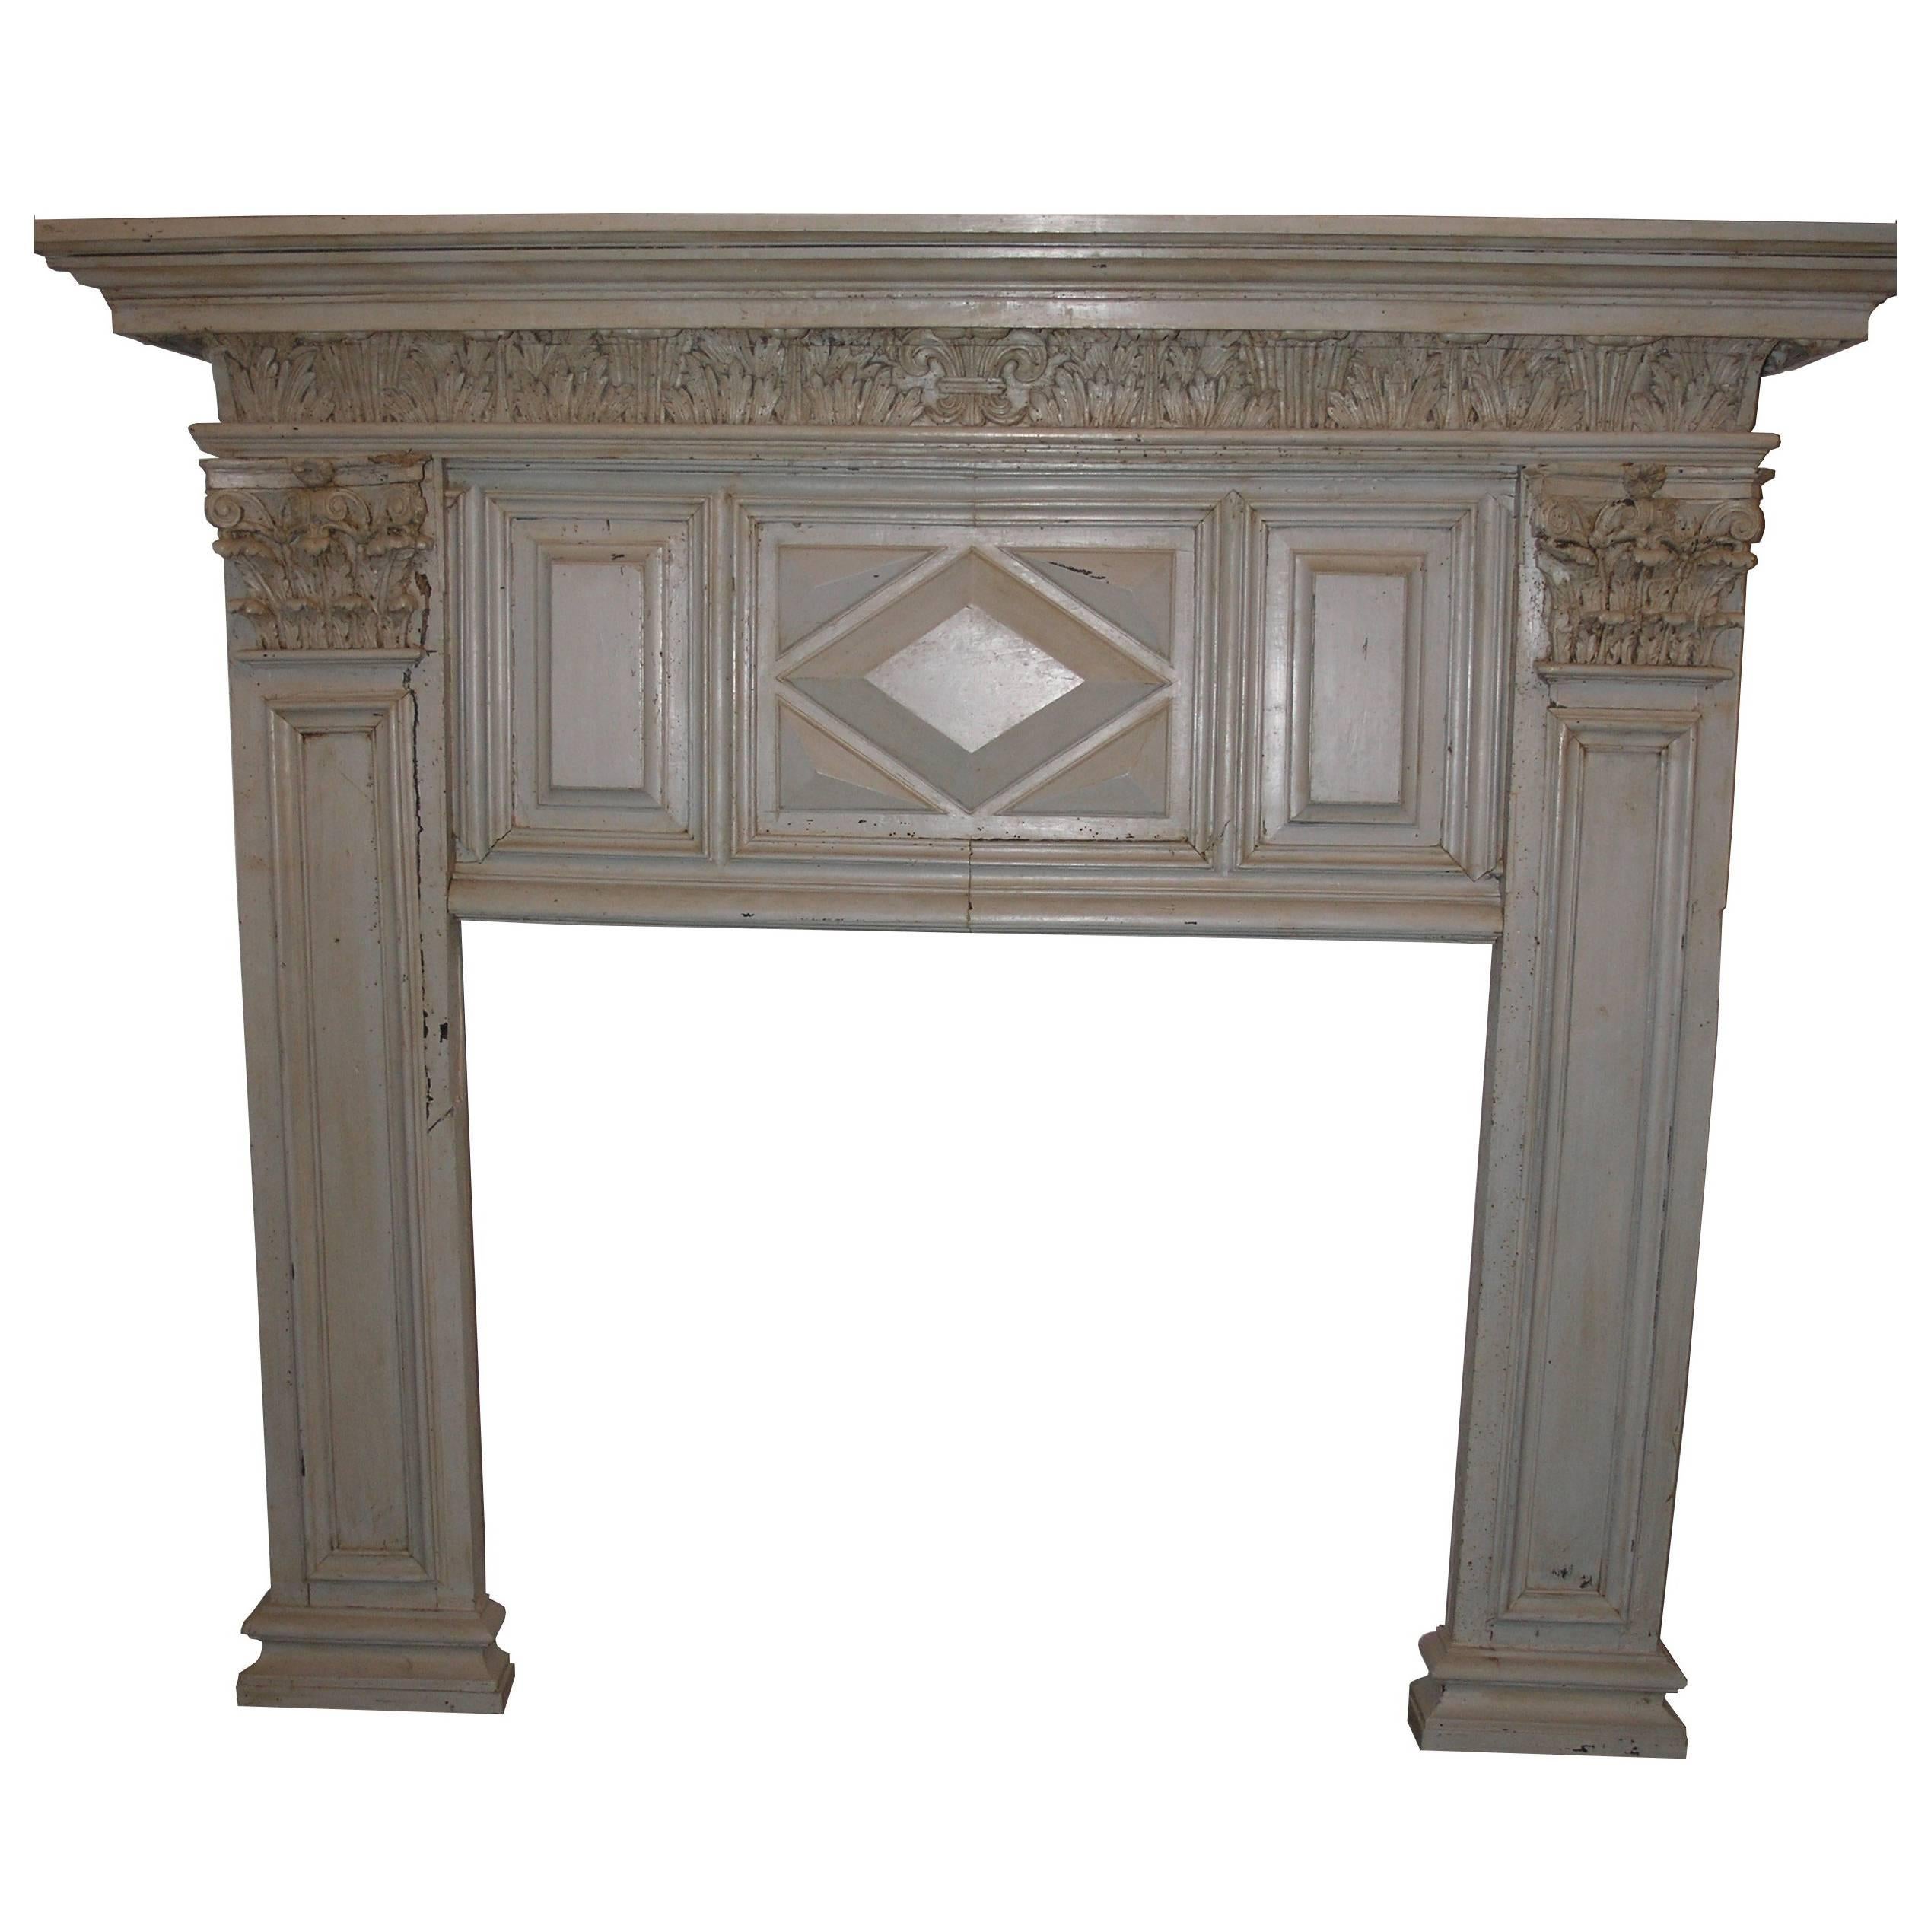 Antique Lacquered Fireplace